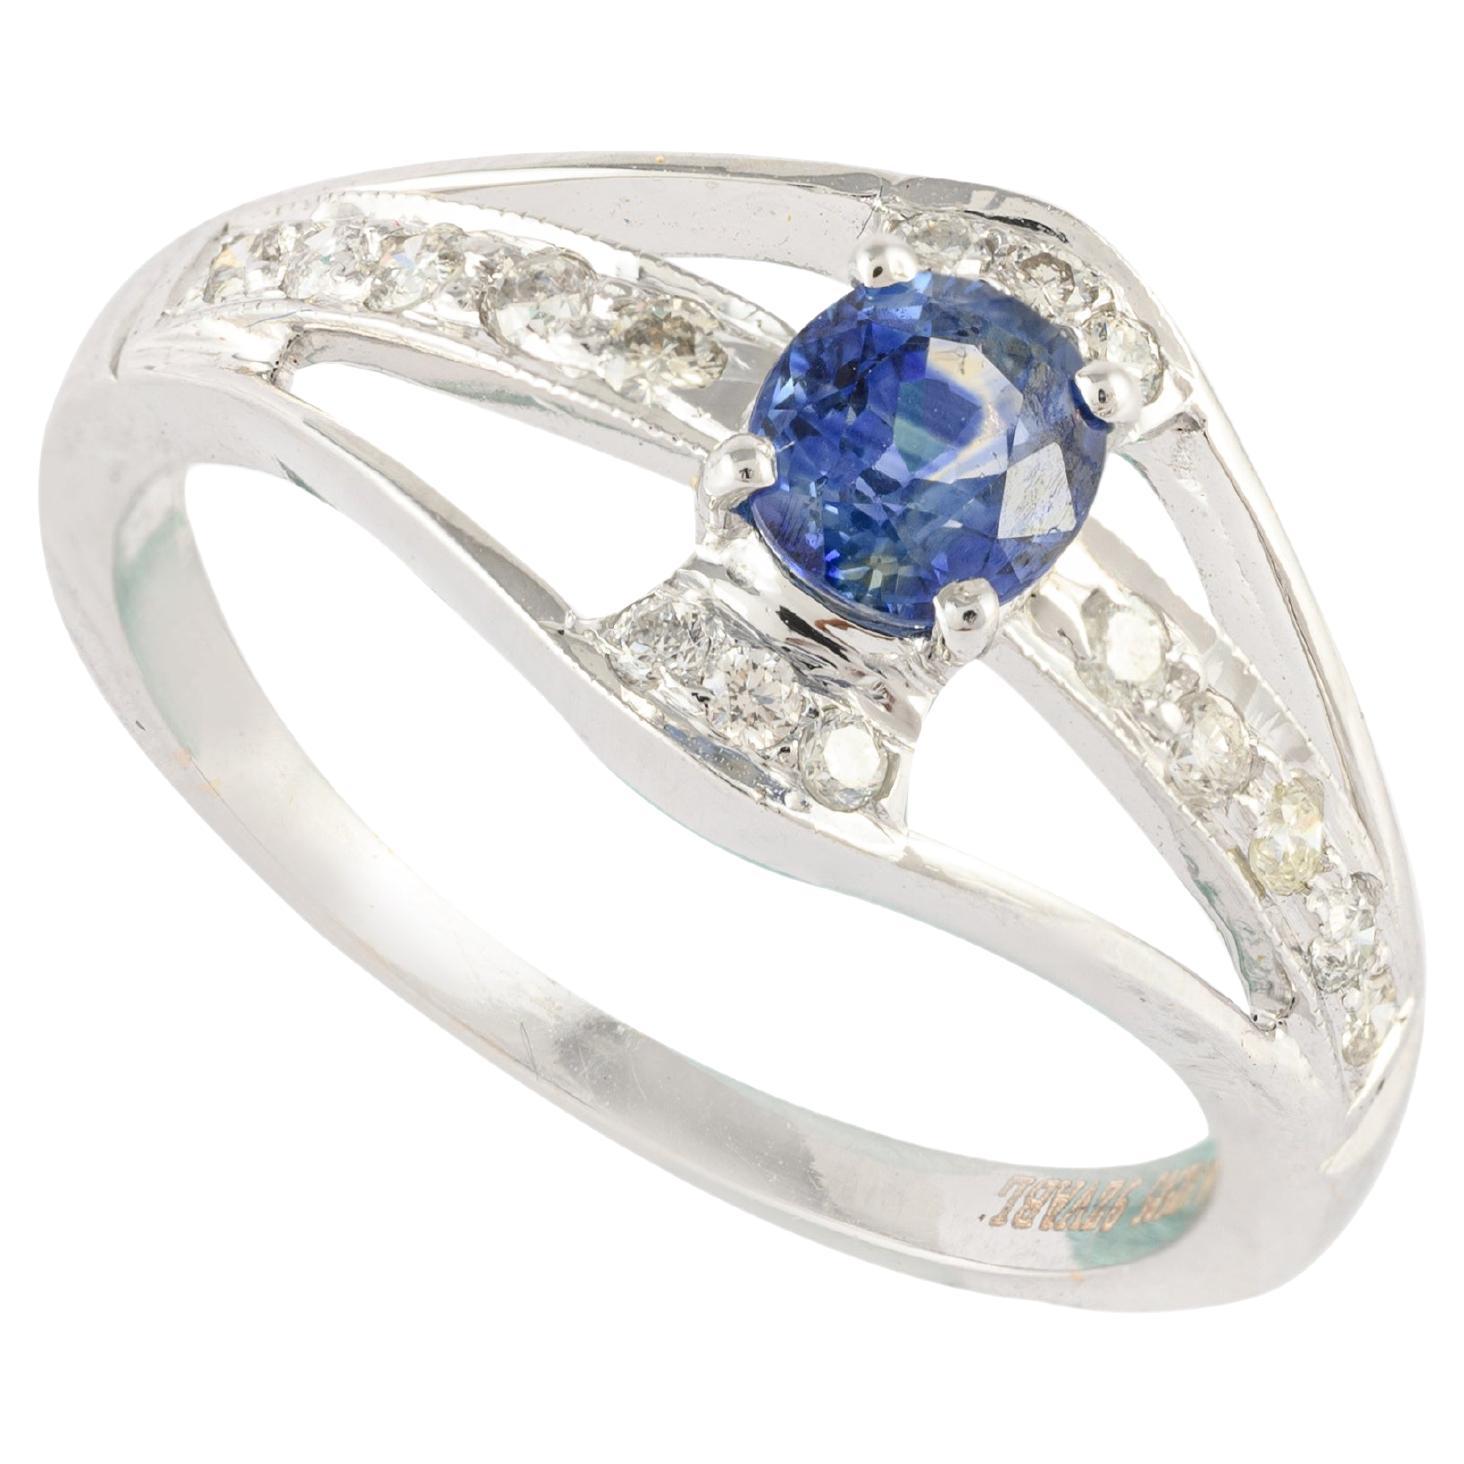 For Sale:  Elegant Diamond and Blue Sapphire Ring in 14k Solid White Gold